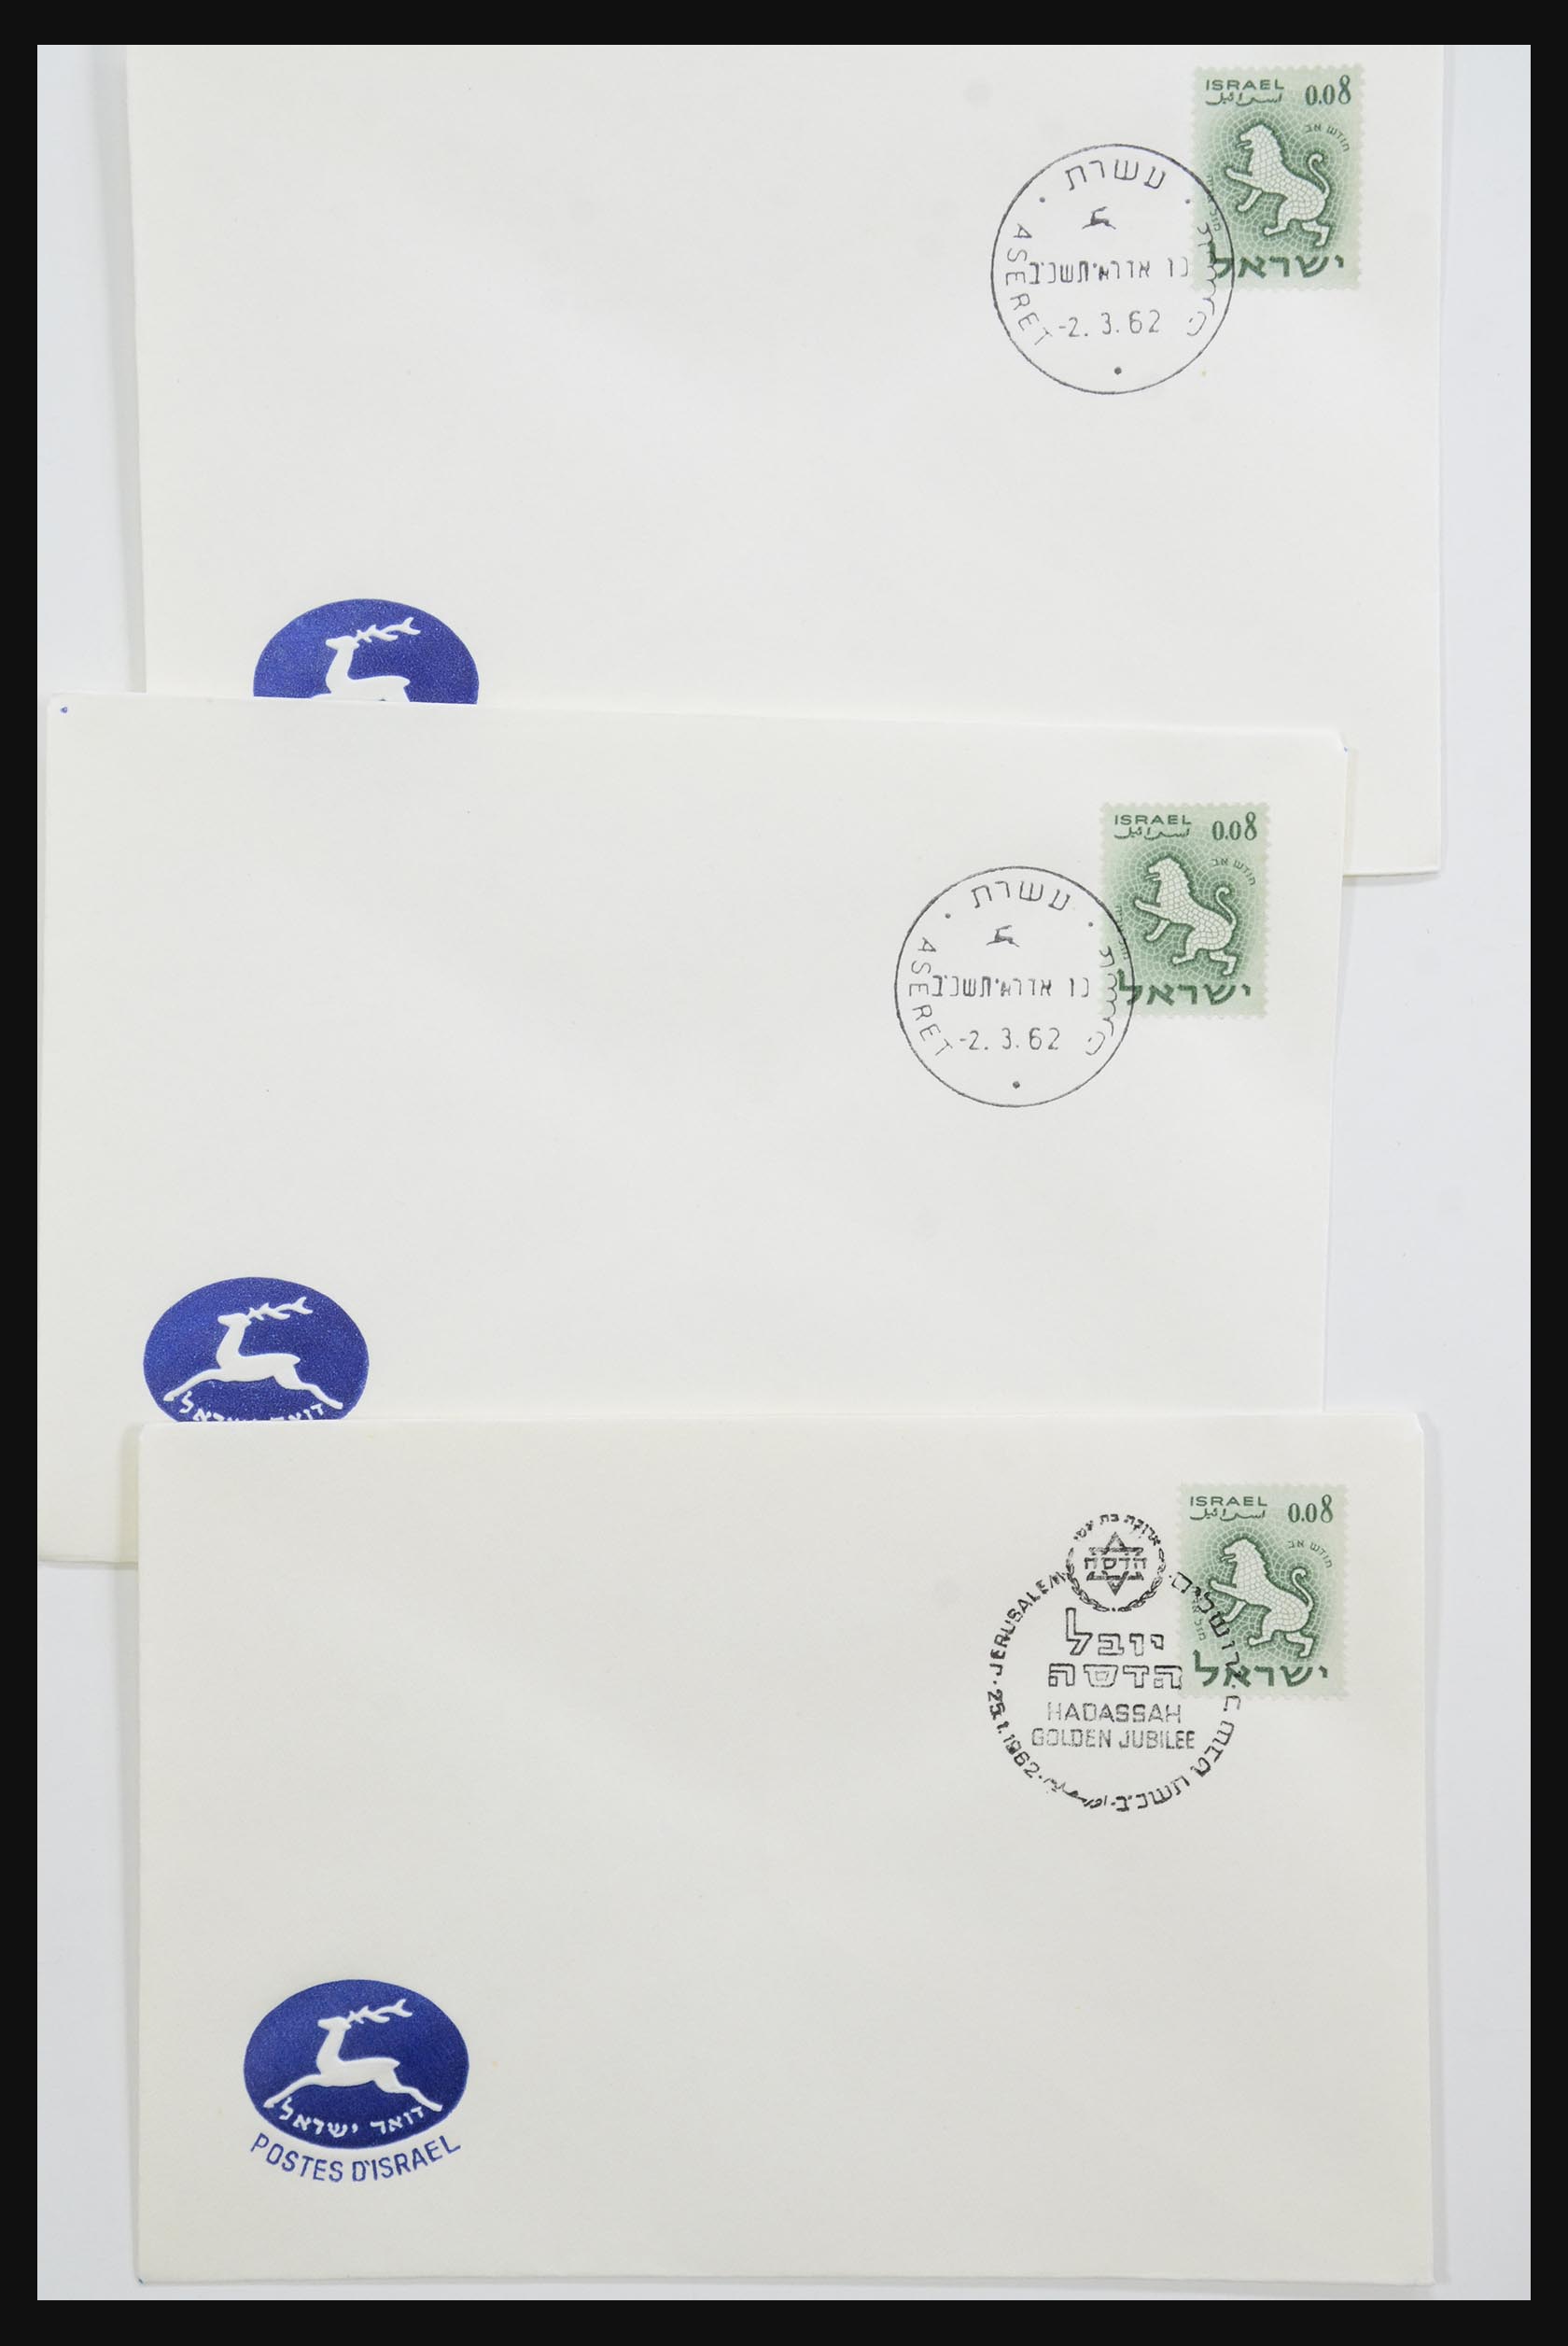 31924 044 - 31924 Israel first day cover collection 1957-2003.